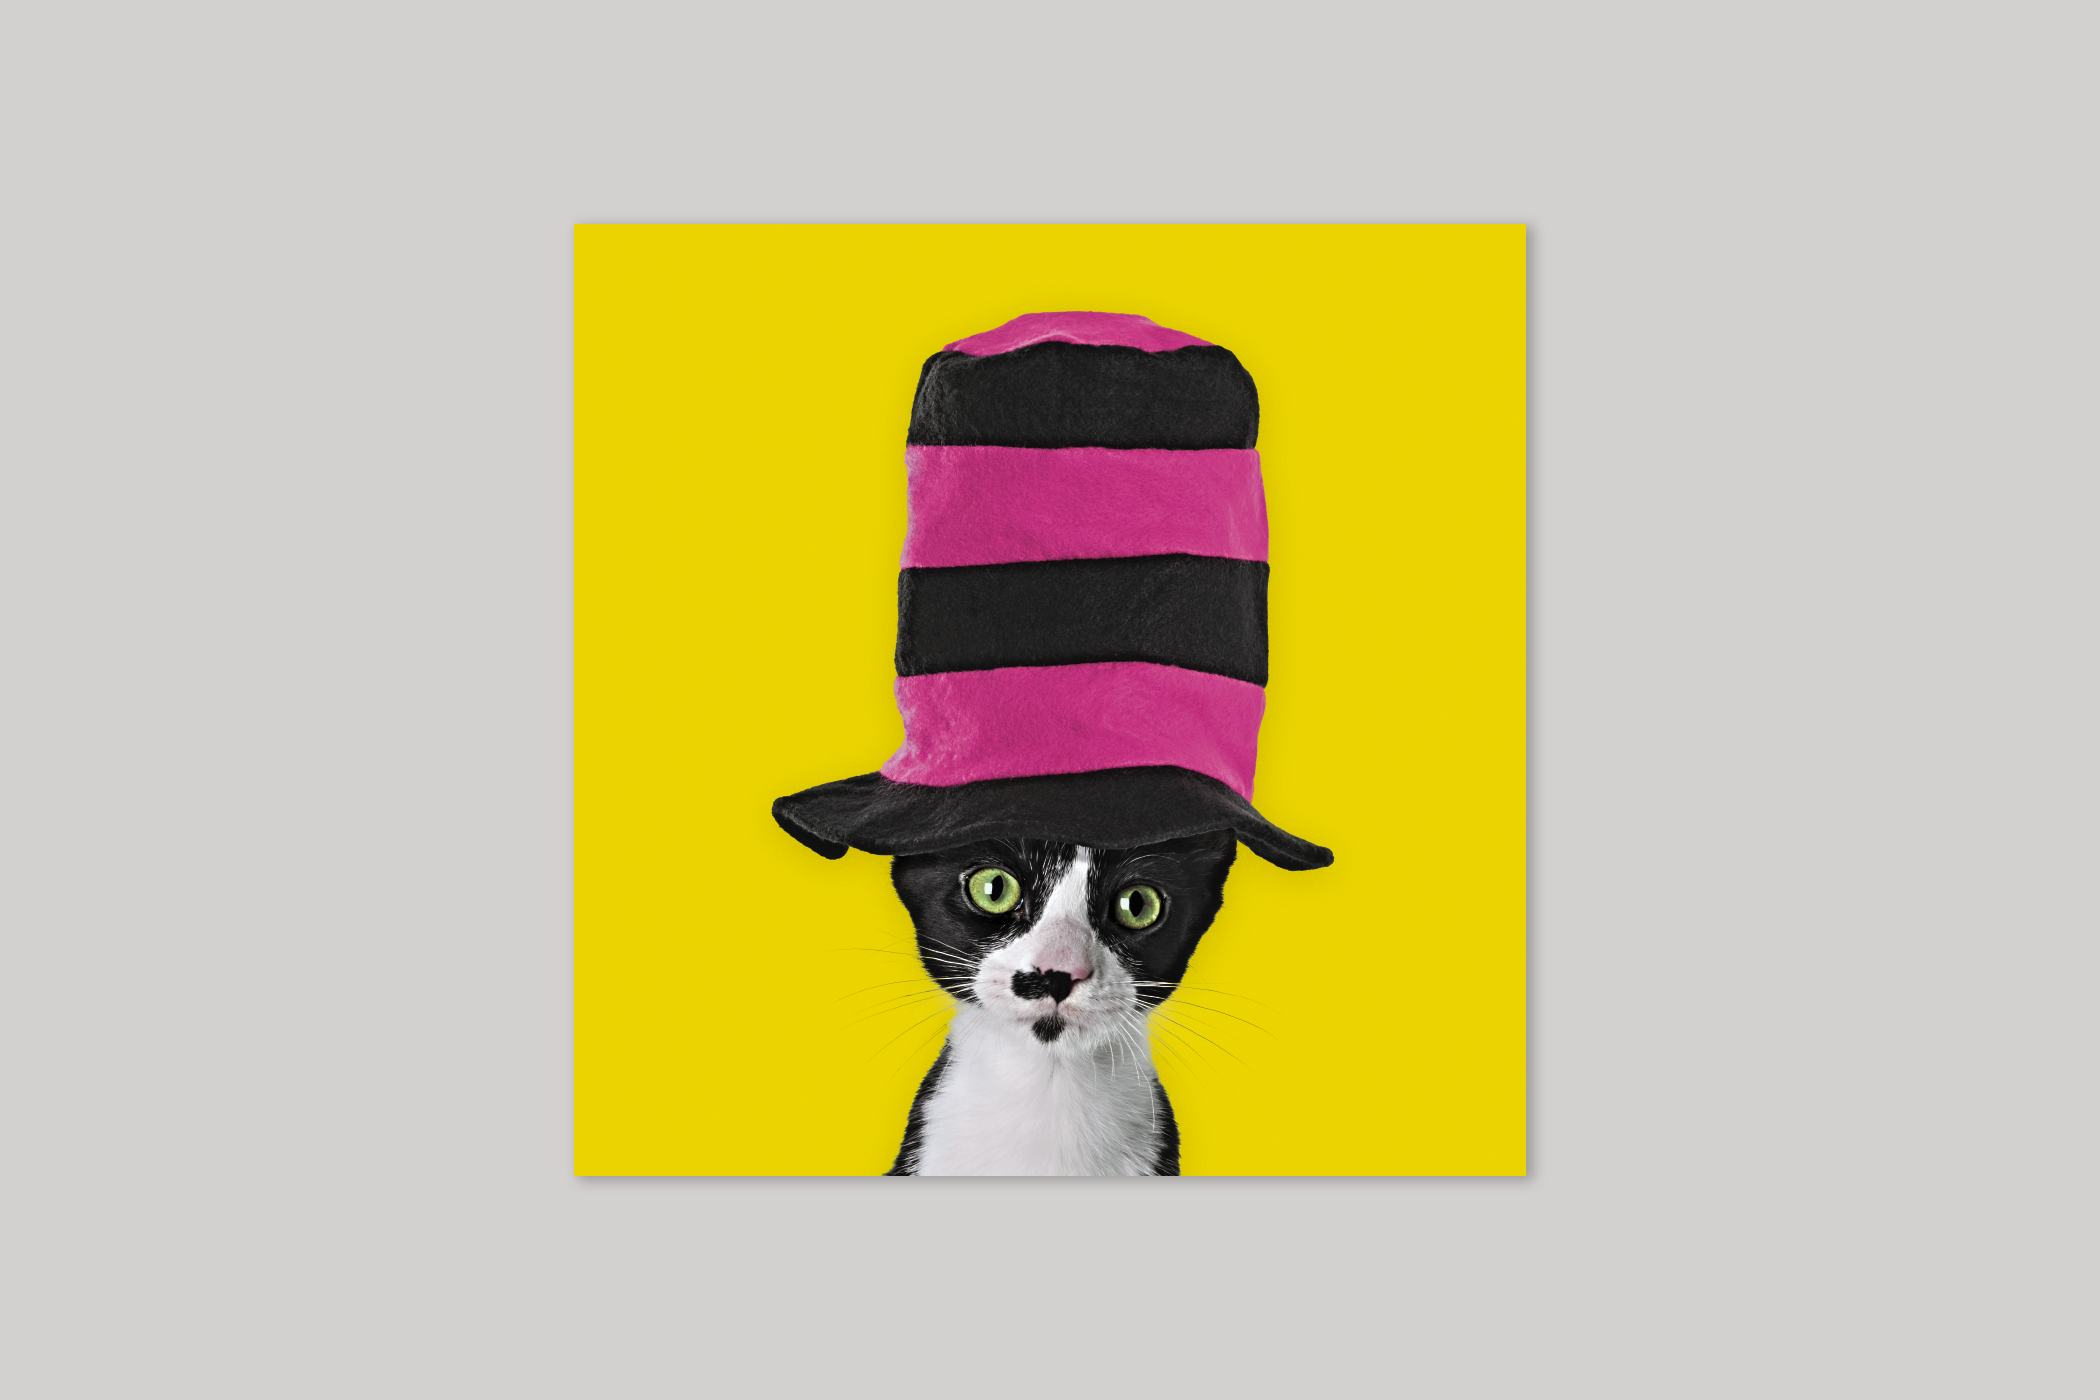 Top Hat from Wildthings range of greeting cards by Icon.